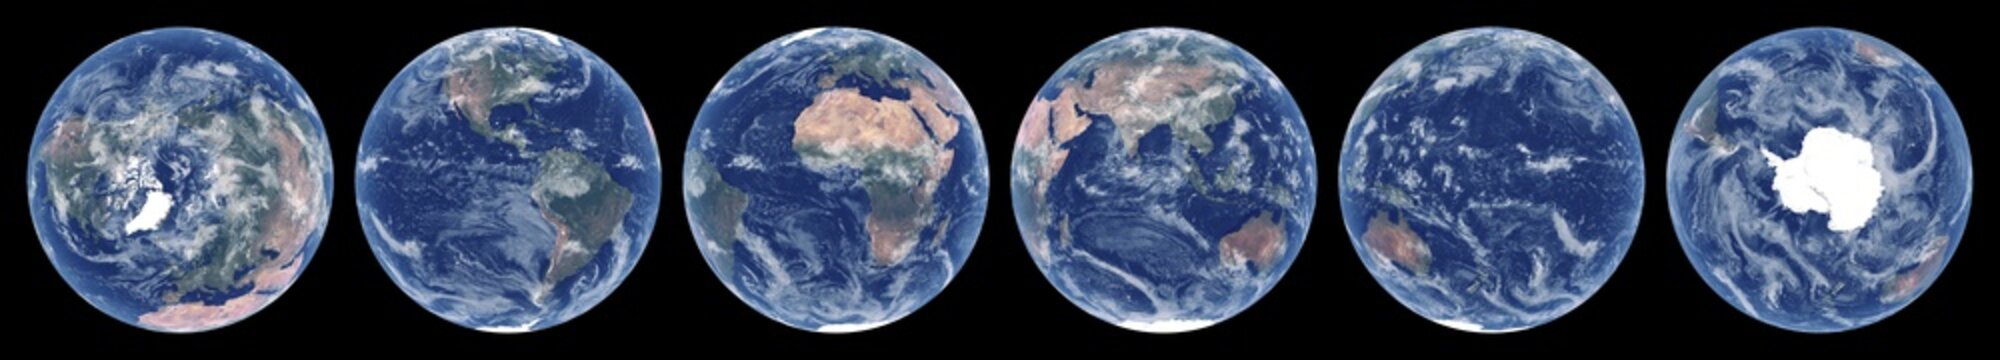 Earth from space. Set of satellite images of planet Earth. Realistic photo of Earth frome above. Space views of hemispheres. Texture of Earth. Elements of this image furnished by NASA.